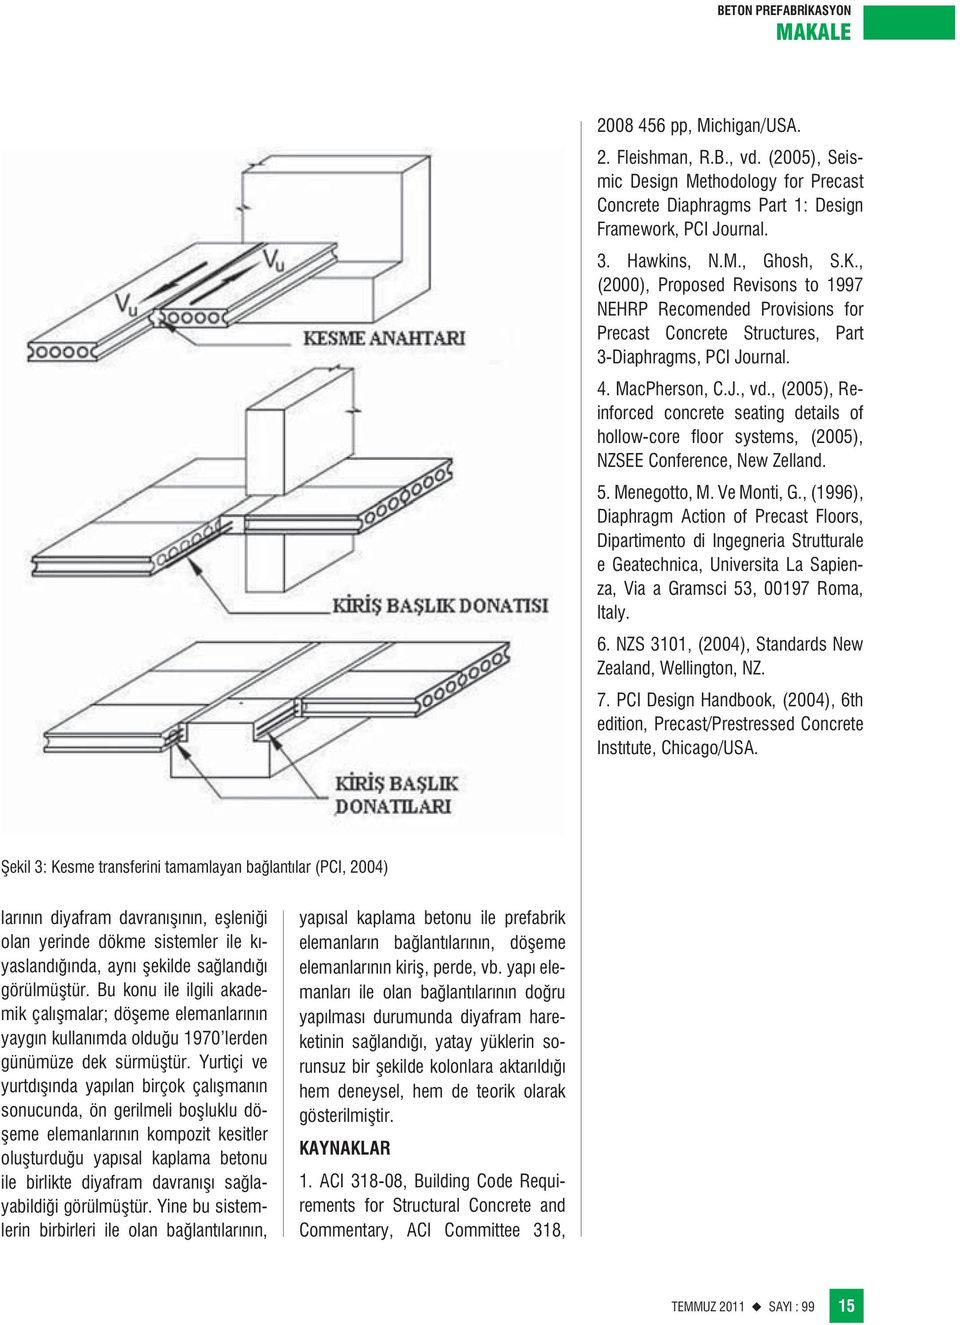 , (2005), Reinforced concrete seating details of hollow-core floor systems, (2005), NZSEE Conference, New Zelland. 5. Menegotto, M. Ve Monti, G.